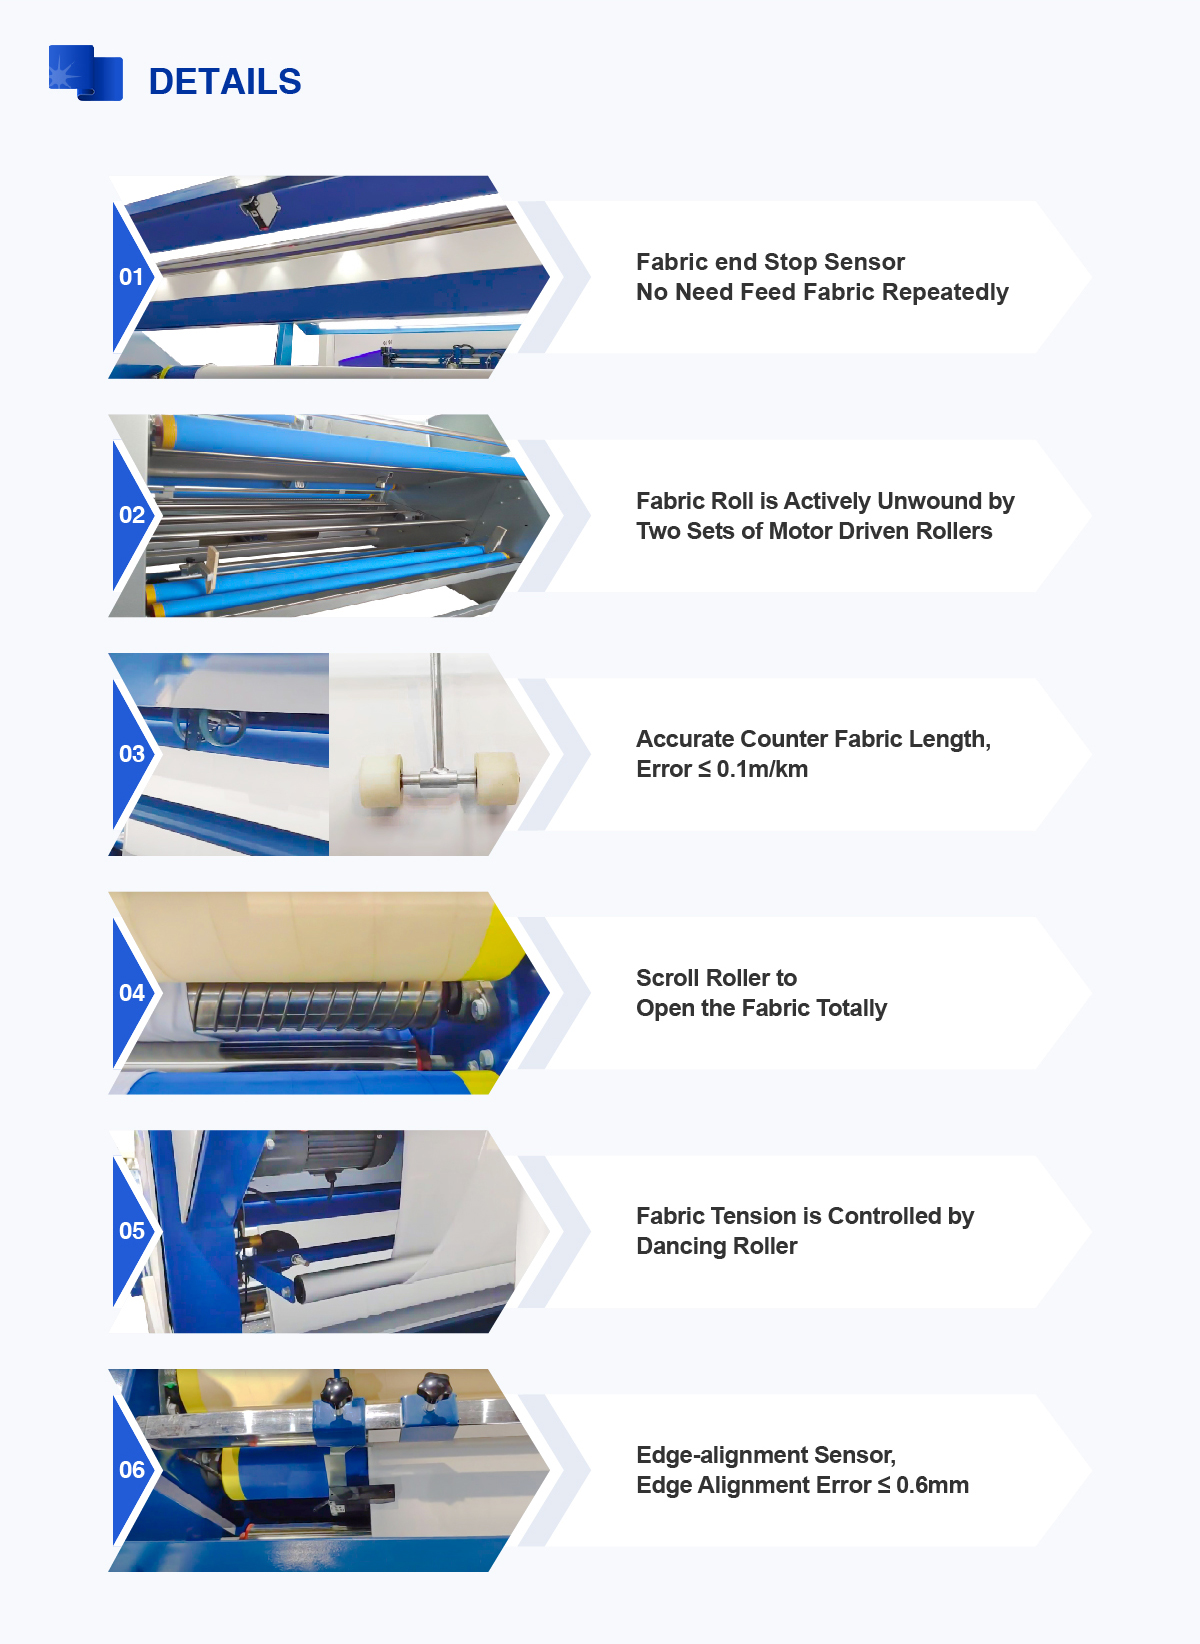 SUNTECH fabric inspection table for knits